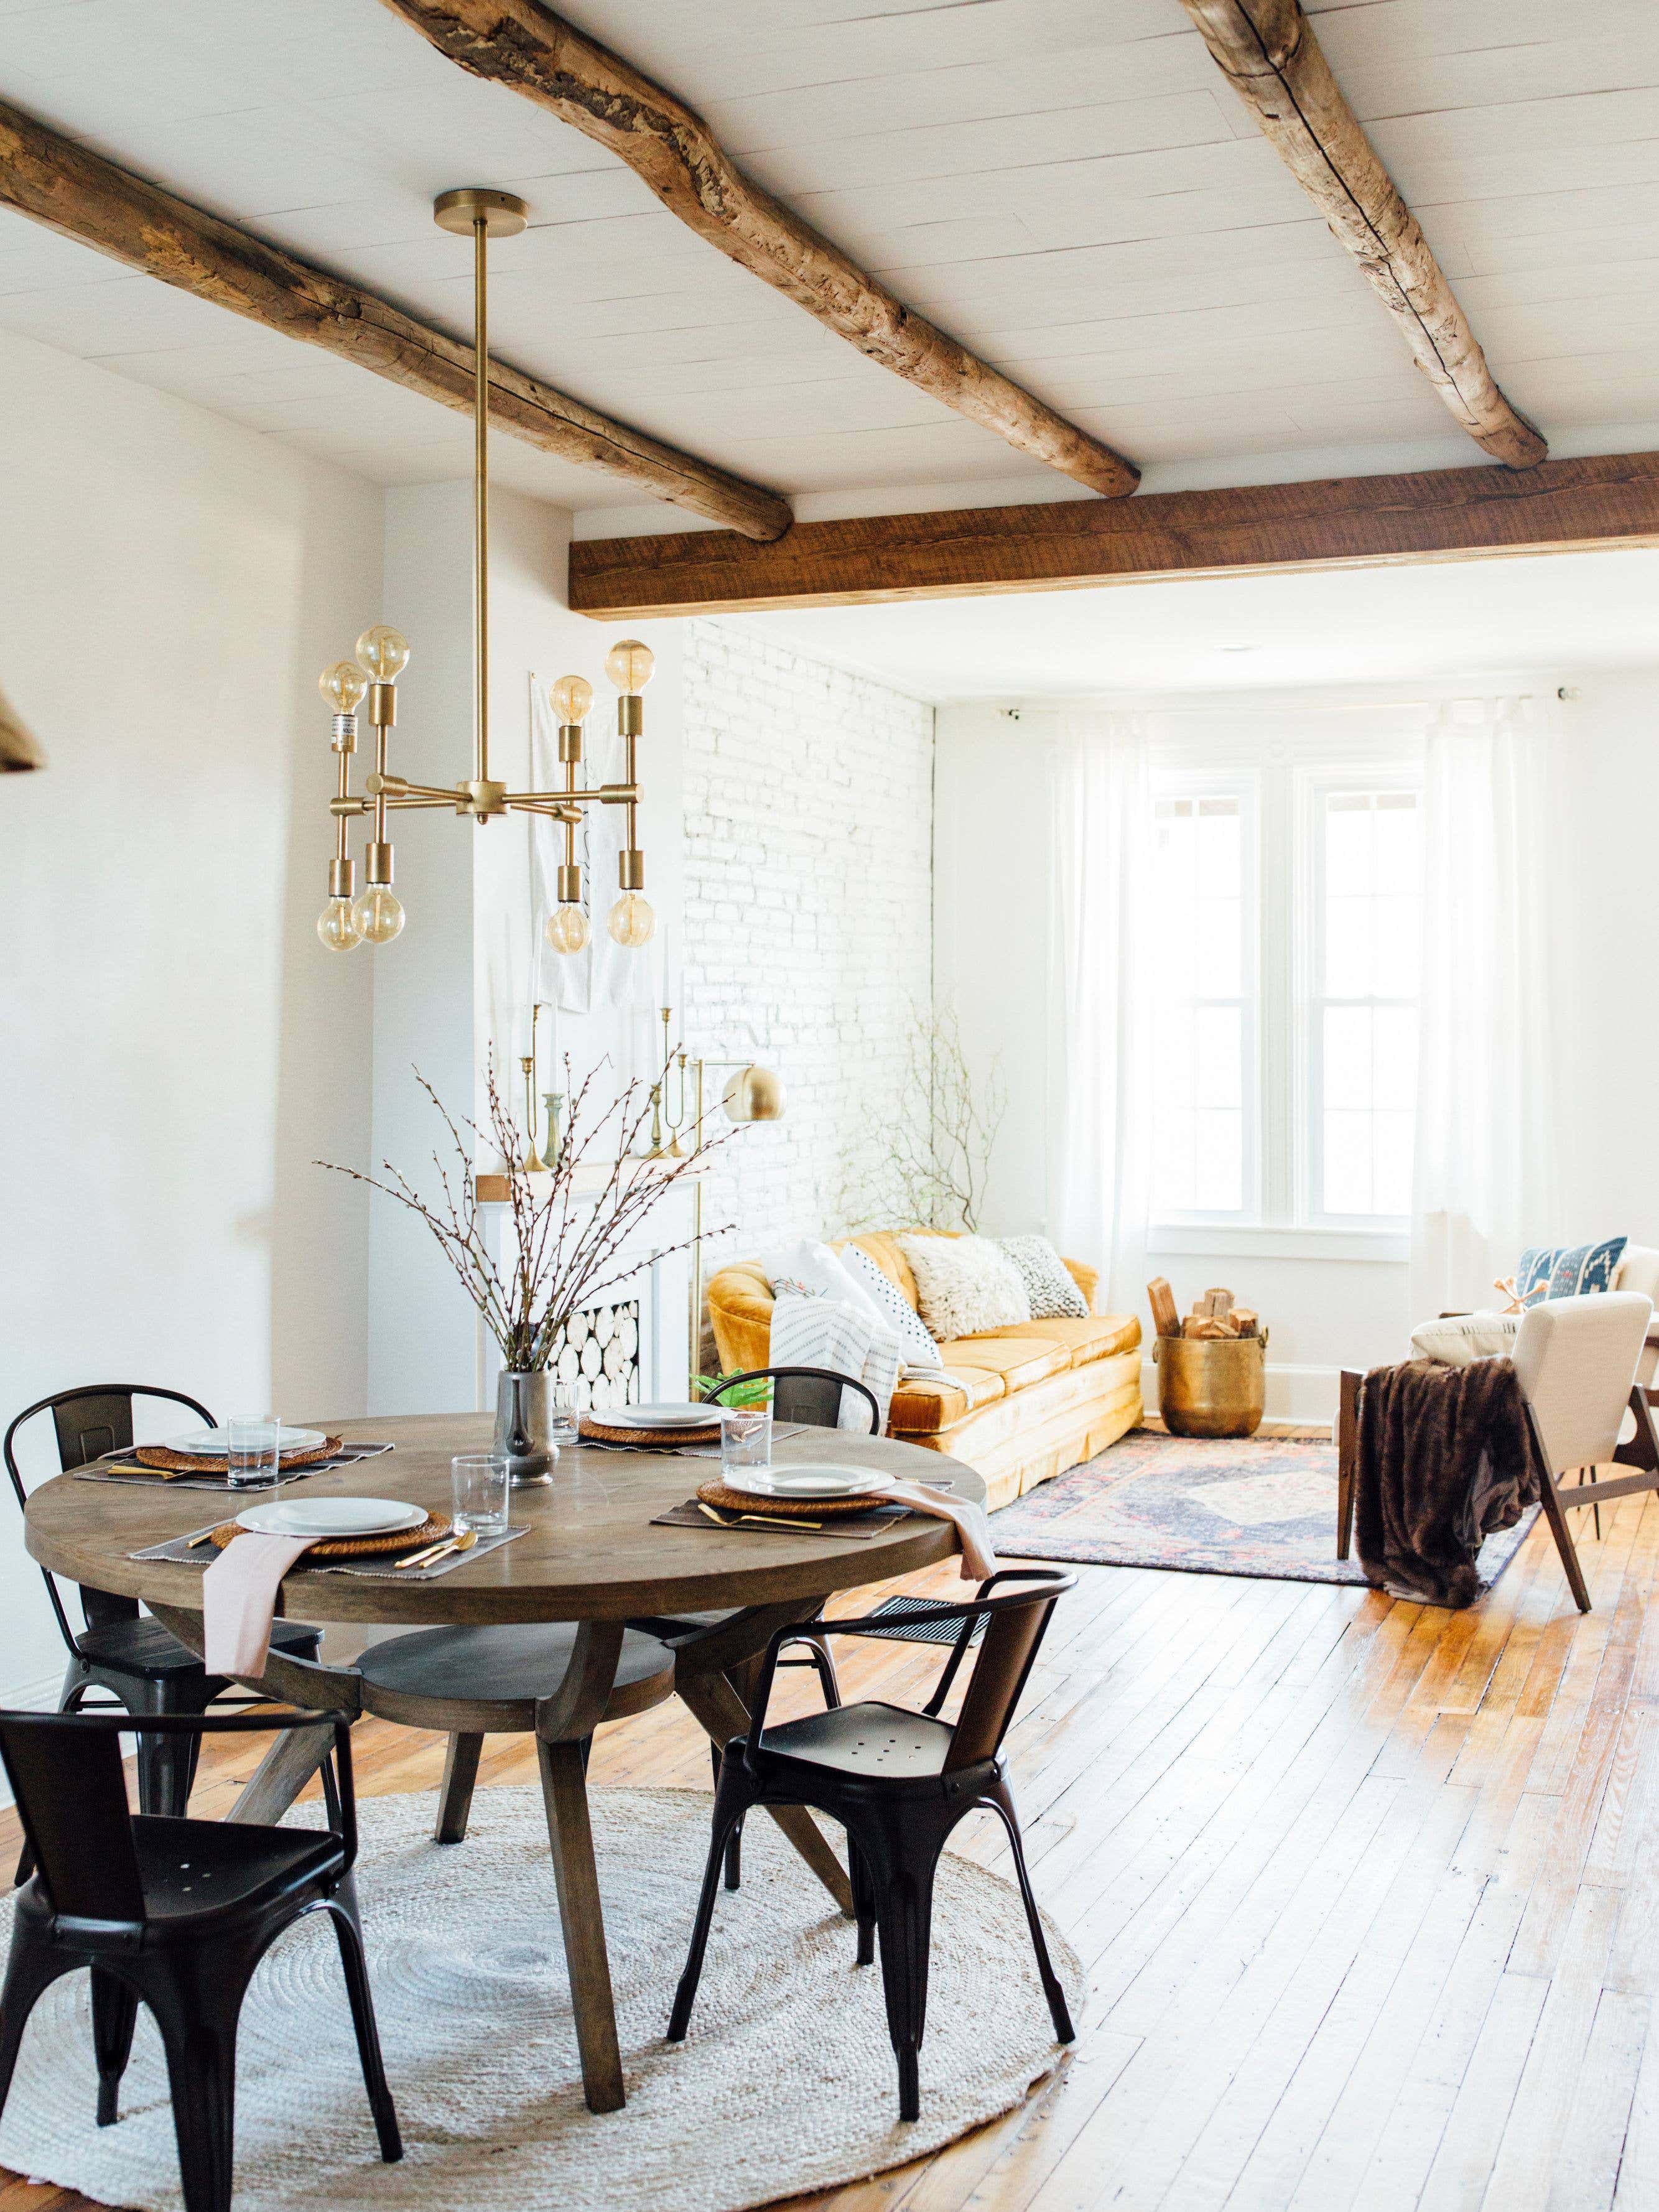 This Couple Quit Their Jobs to Fix Up Homes (With Zero Renovation Experience)